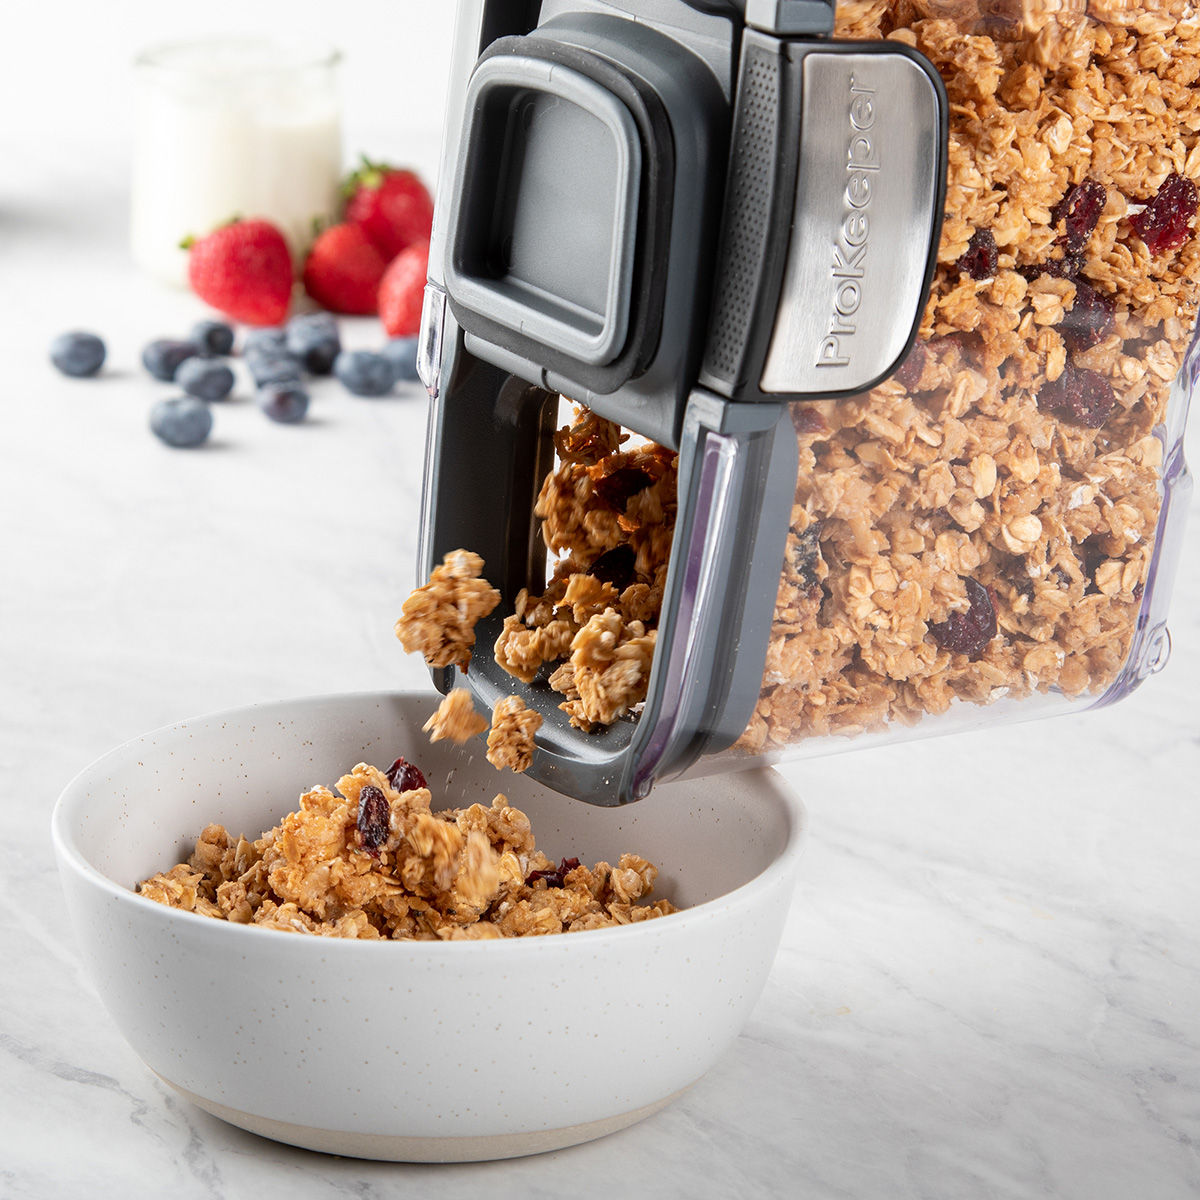 https://www.containerstore.com/catalogimages/446996/10089390-ProKeeper-Cereal-VEN4a.jpg